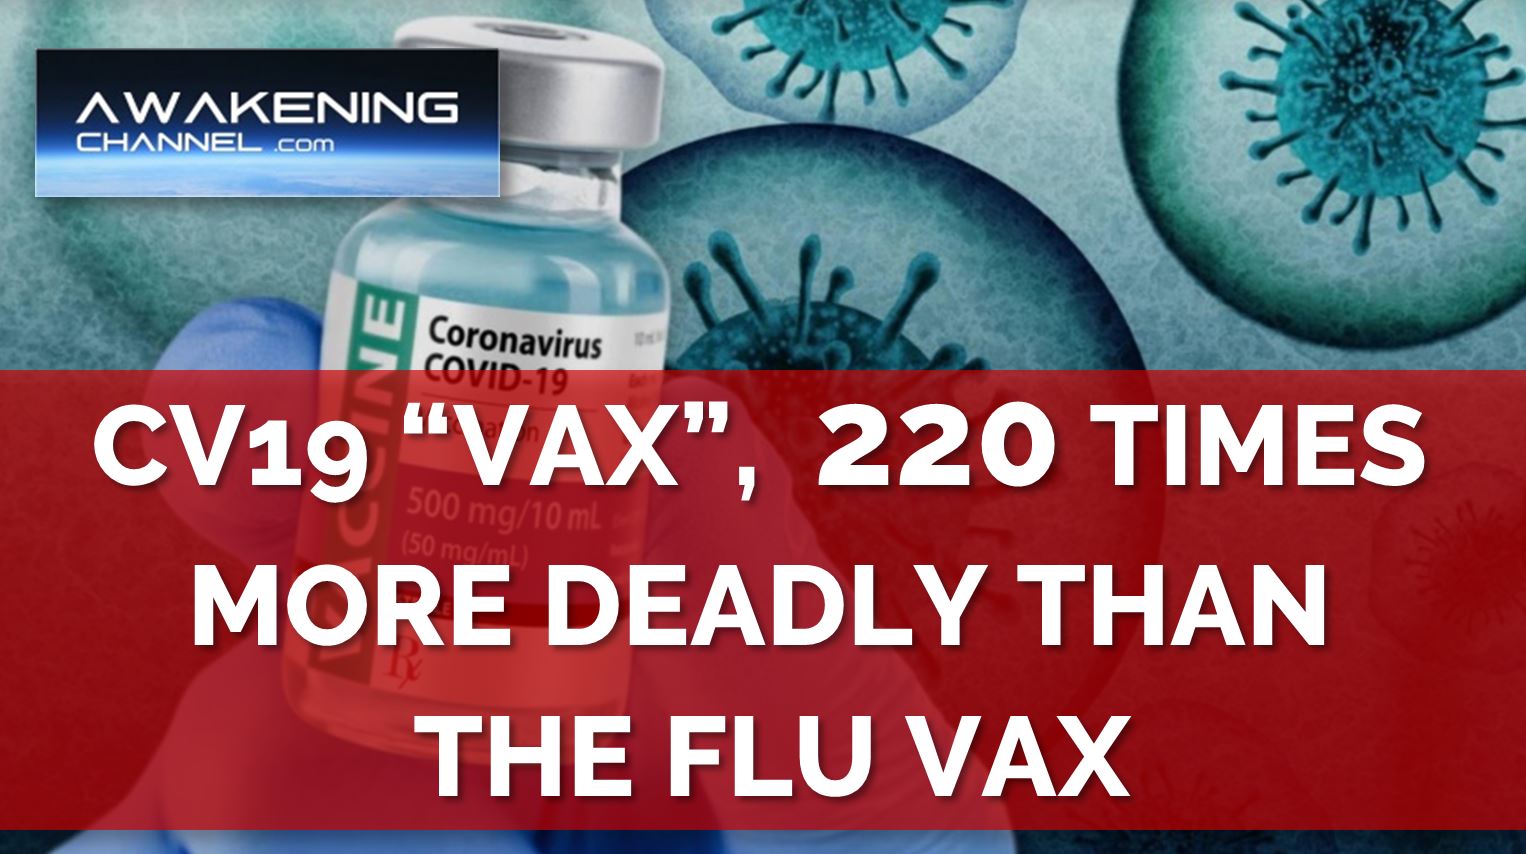 CONFIRMED: THE CV19 “VAX”,  220 TIMES MORE DEADLY THAN THE FLU VAX